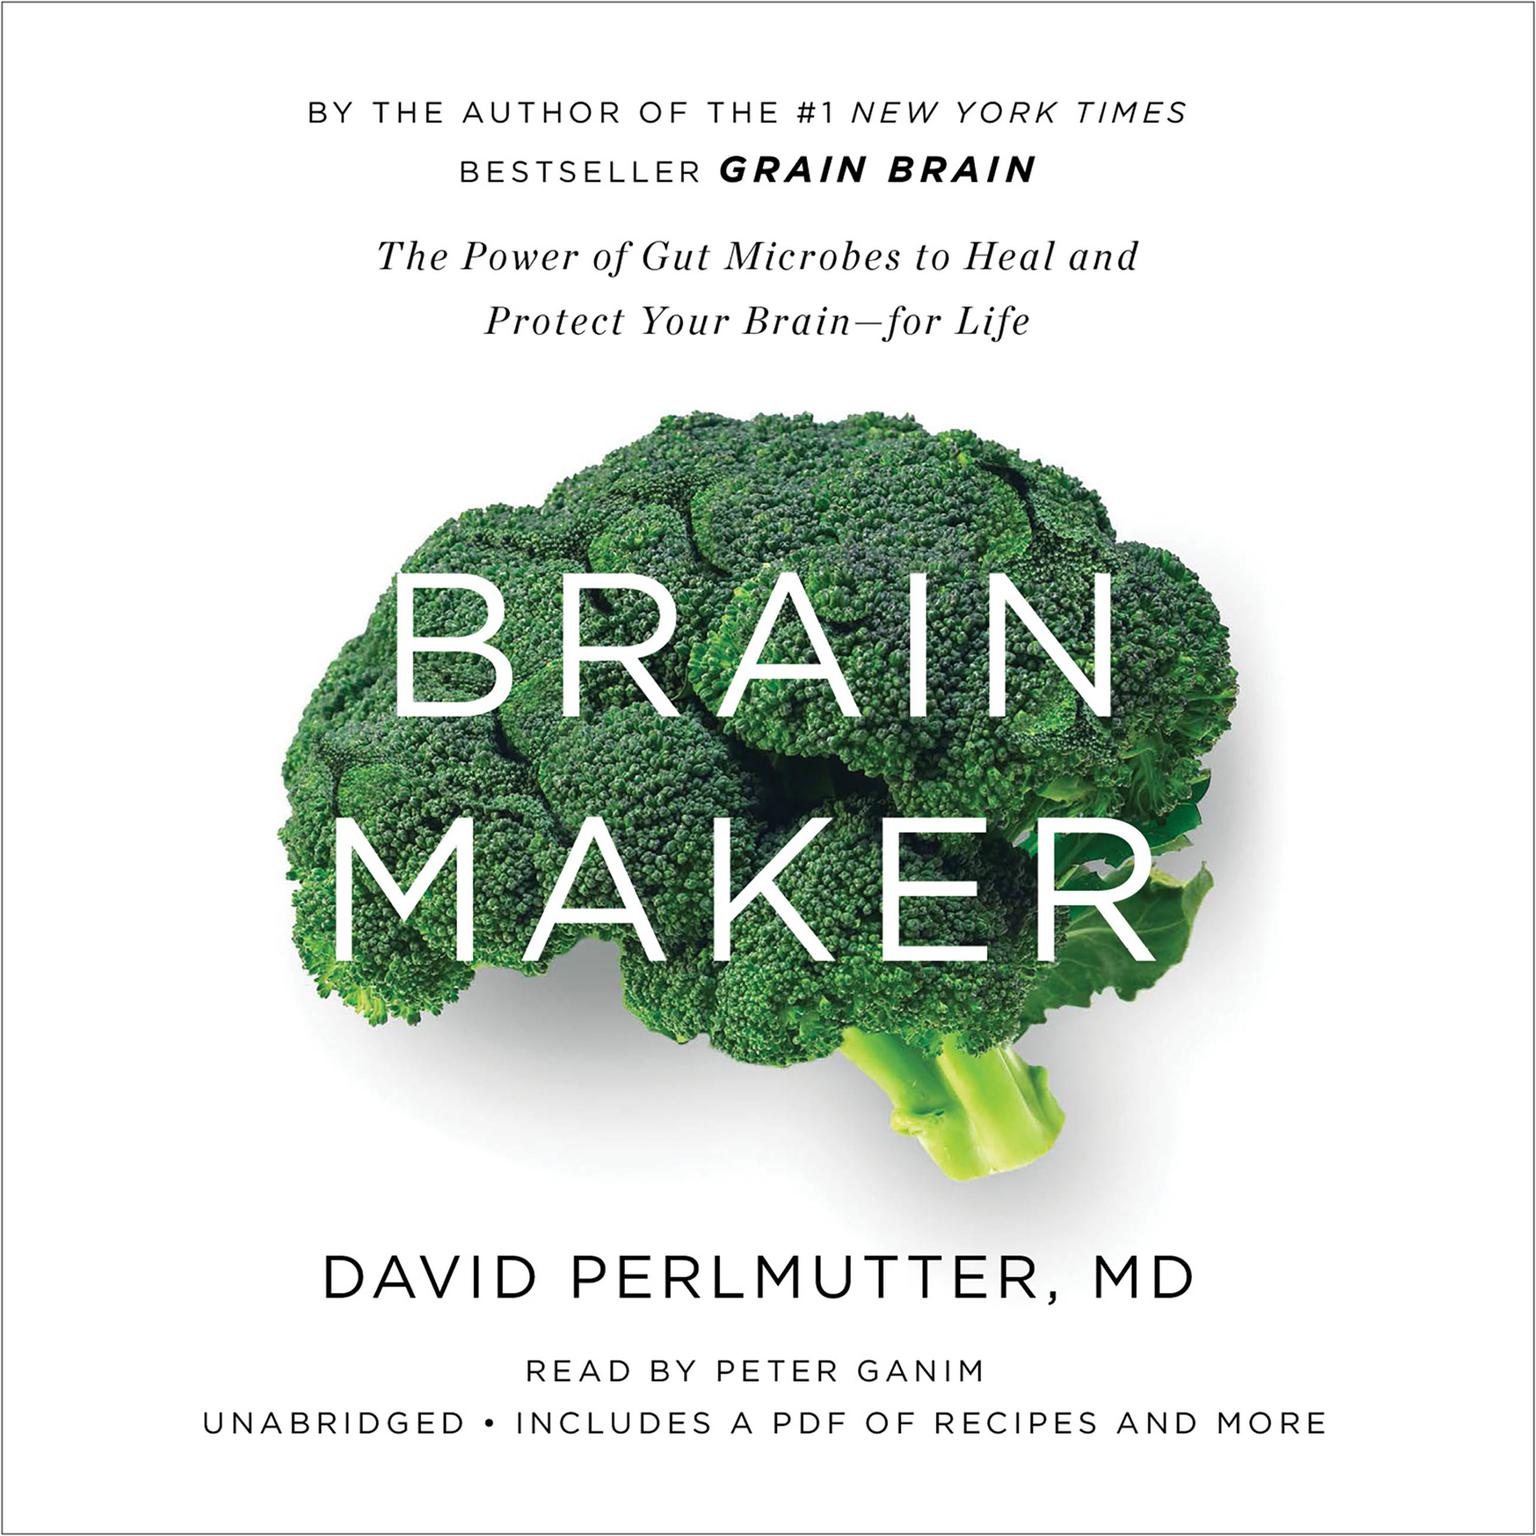 Brain Maker: The Power of Gut Microbes to Heal and Protect Your Brain for Life Audiobook, by David Perlmutter